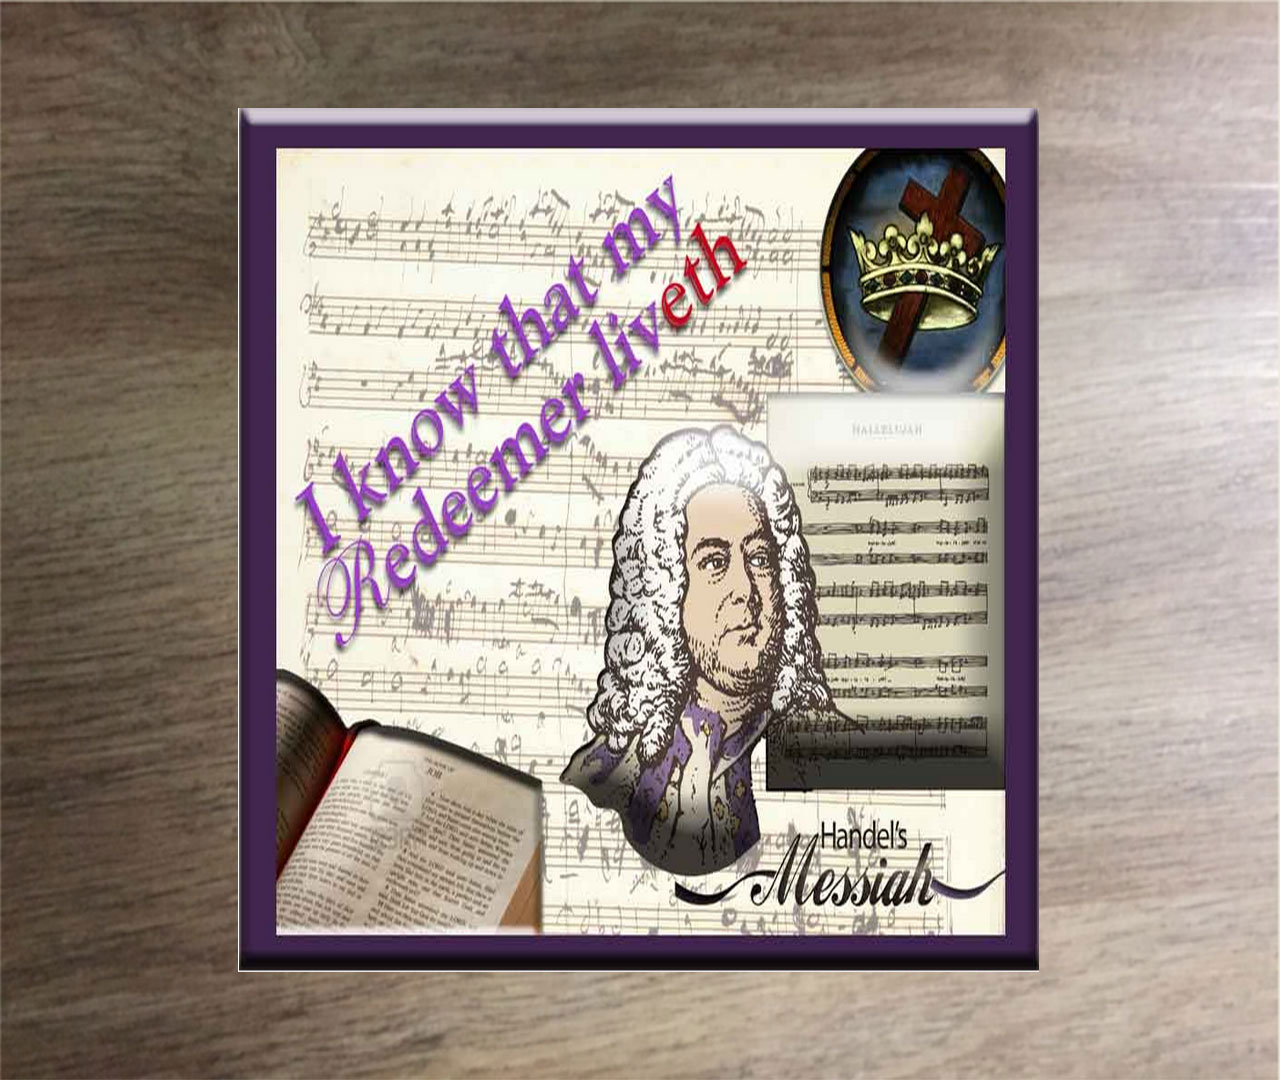 Handel's Messiah image of him with music behind and Bible